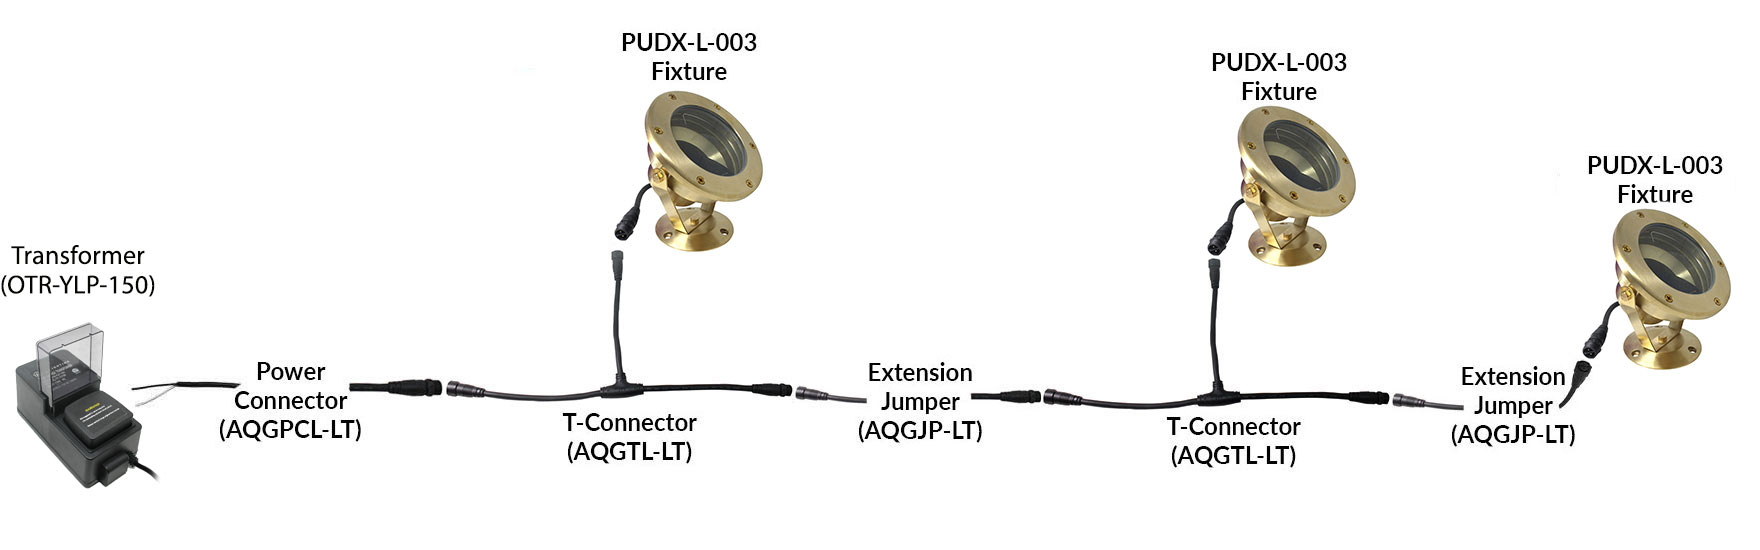 PUDX-L-003 NSC Wiring System Connection Sample